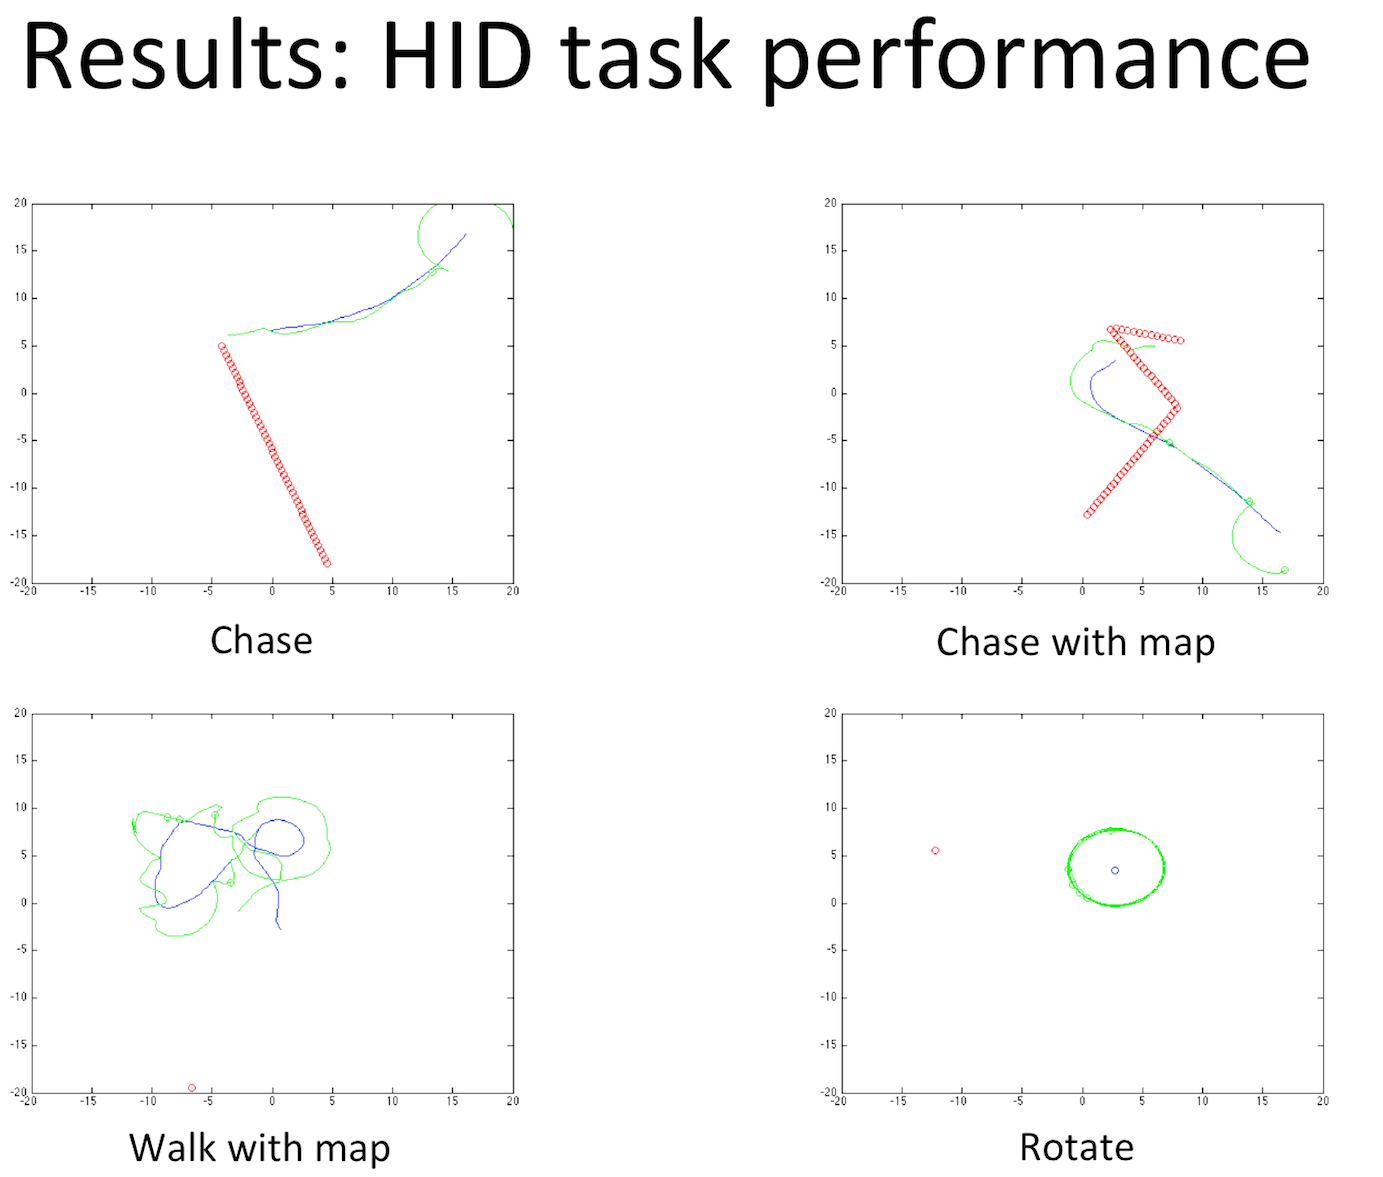 Enlarged view: Results: HID task performance